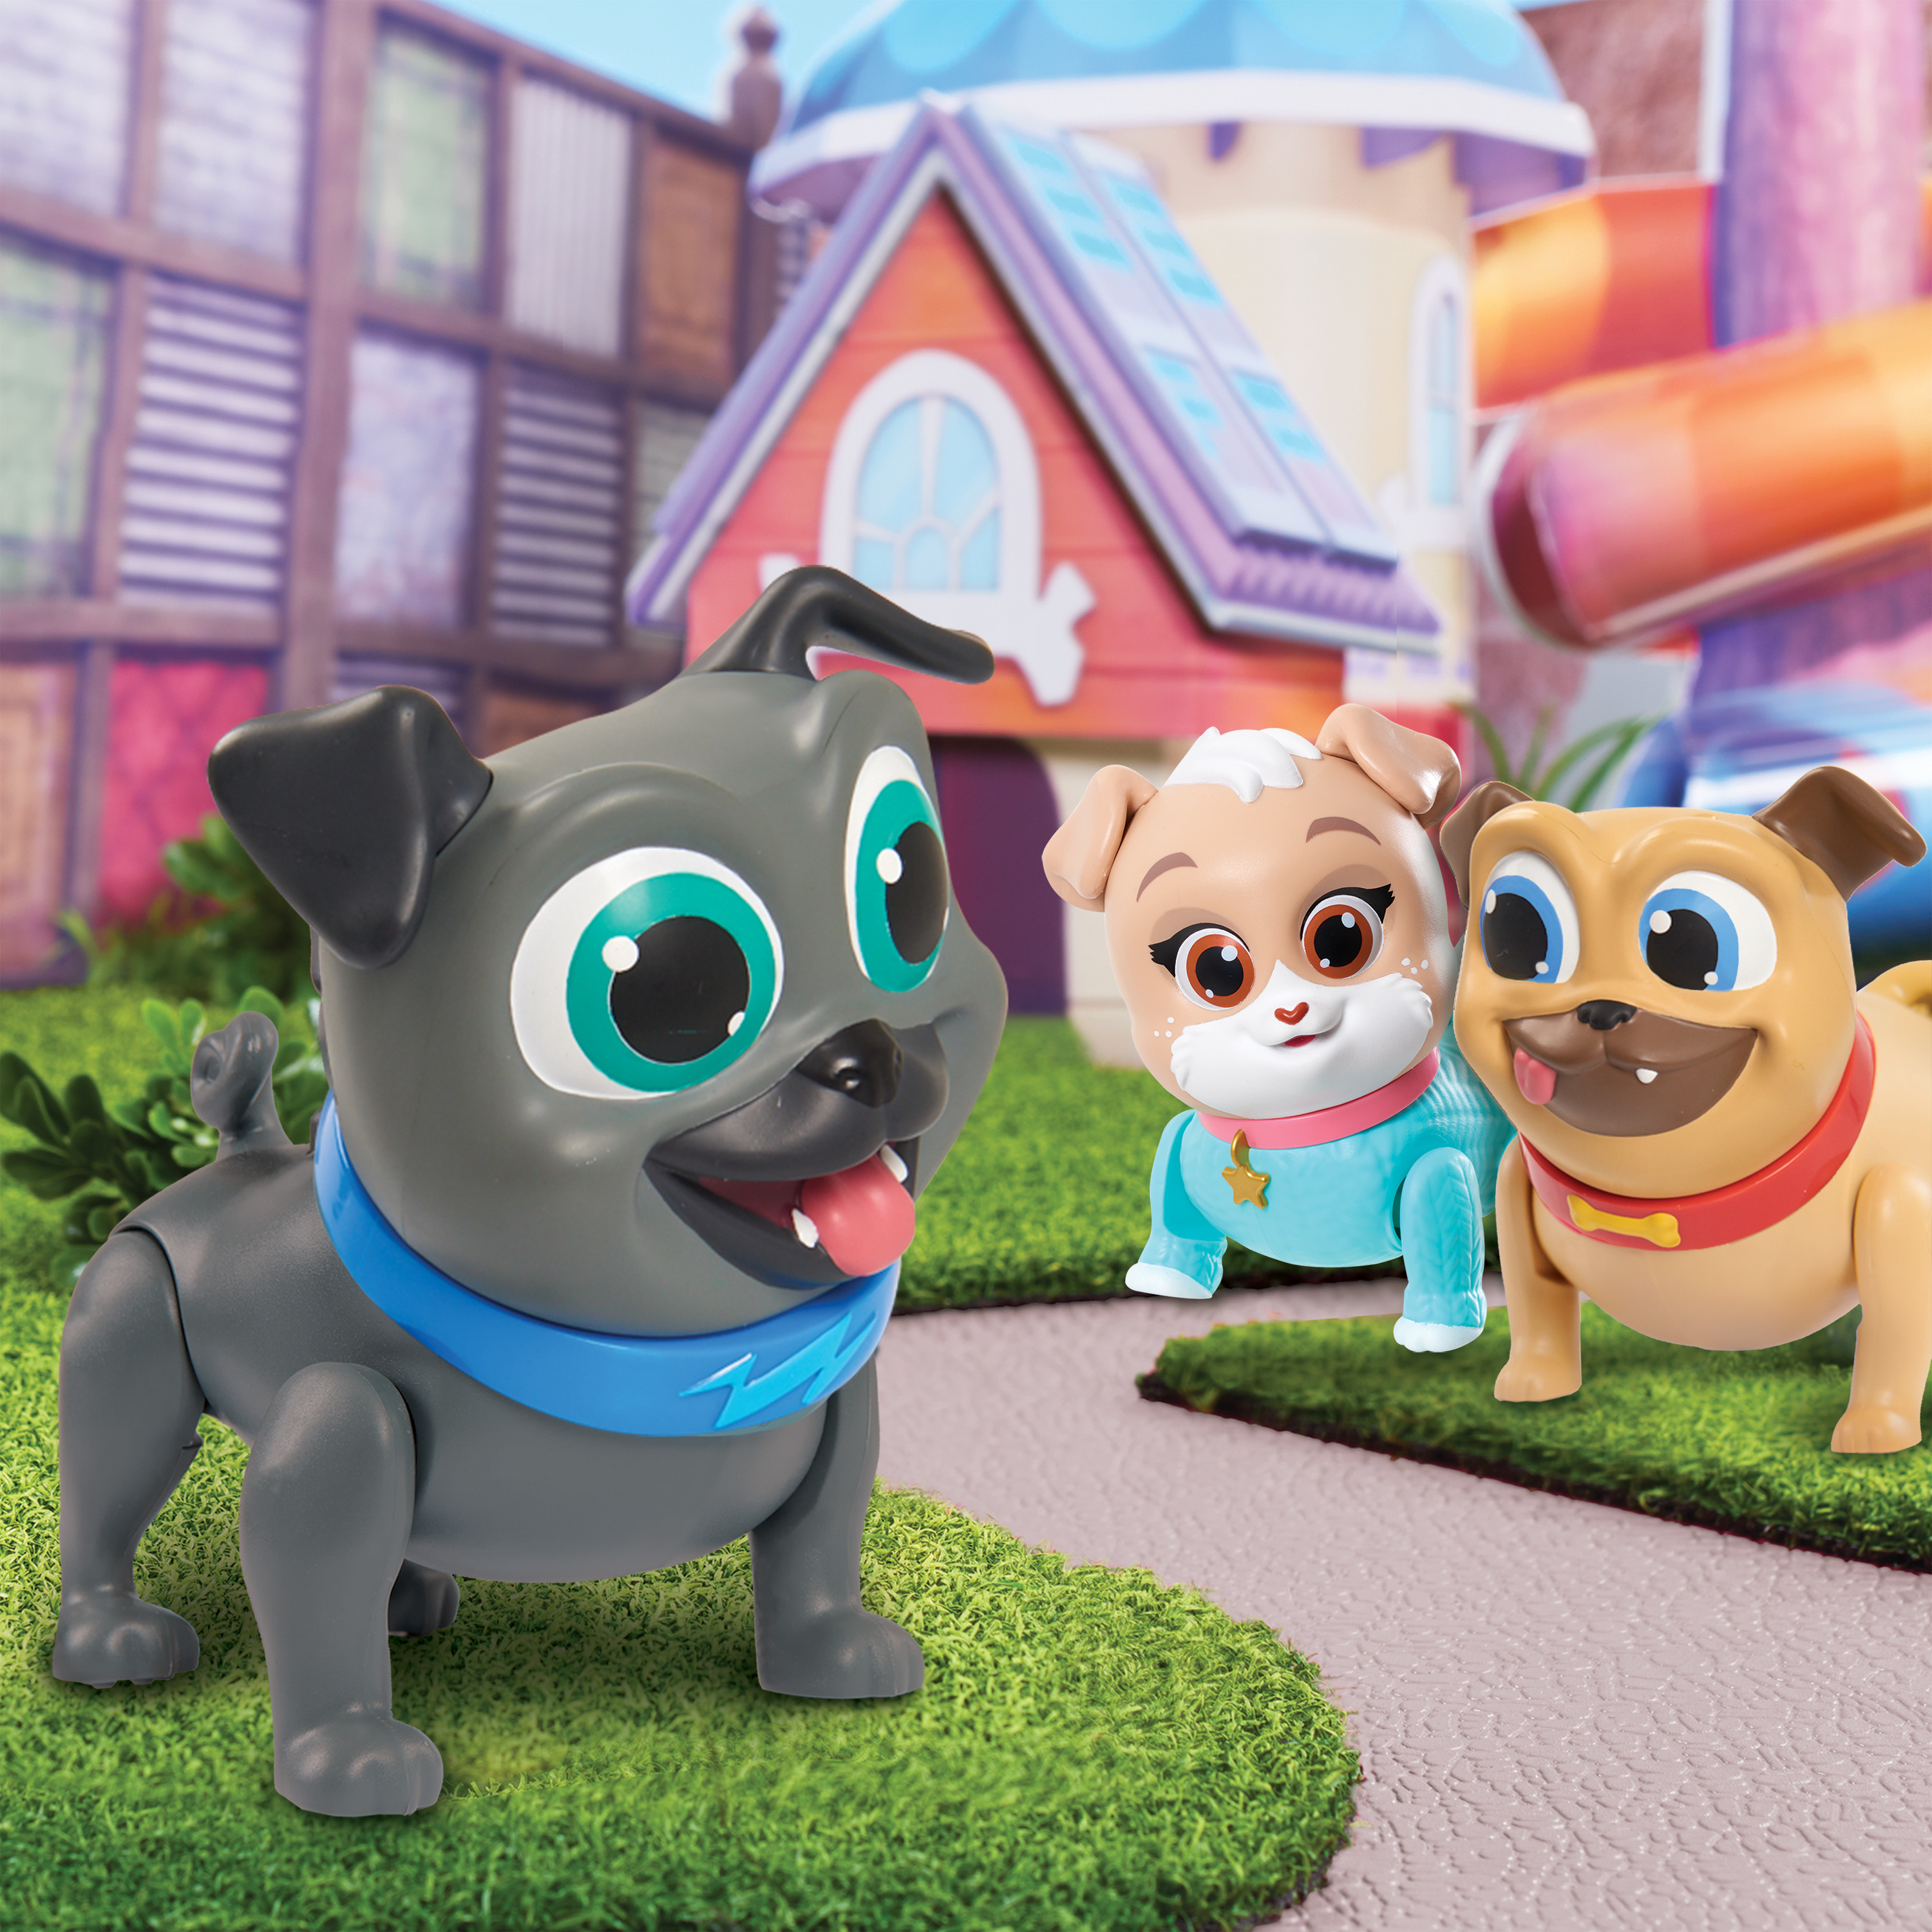 Puppy Dog Pals Surprise Action Figure, Bingo, Officially Licensed Kids Toys for Ages 3 Up, Gifts and Presents - image 5 of 6